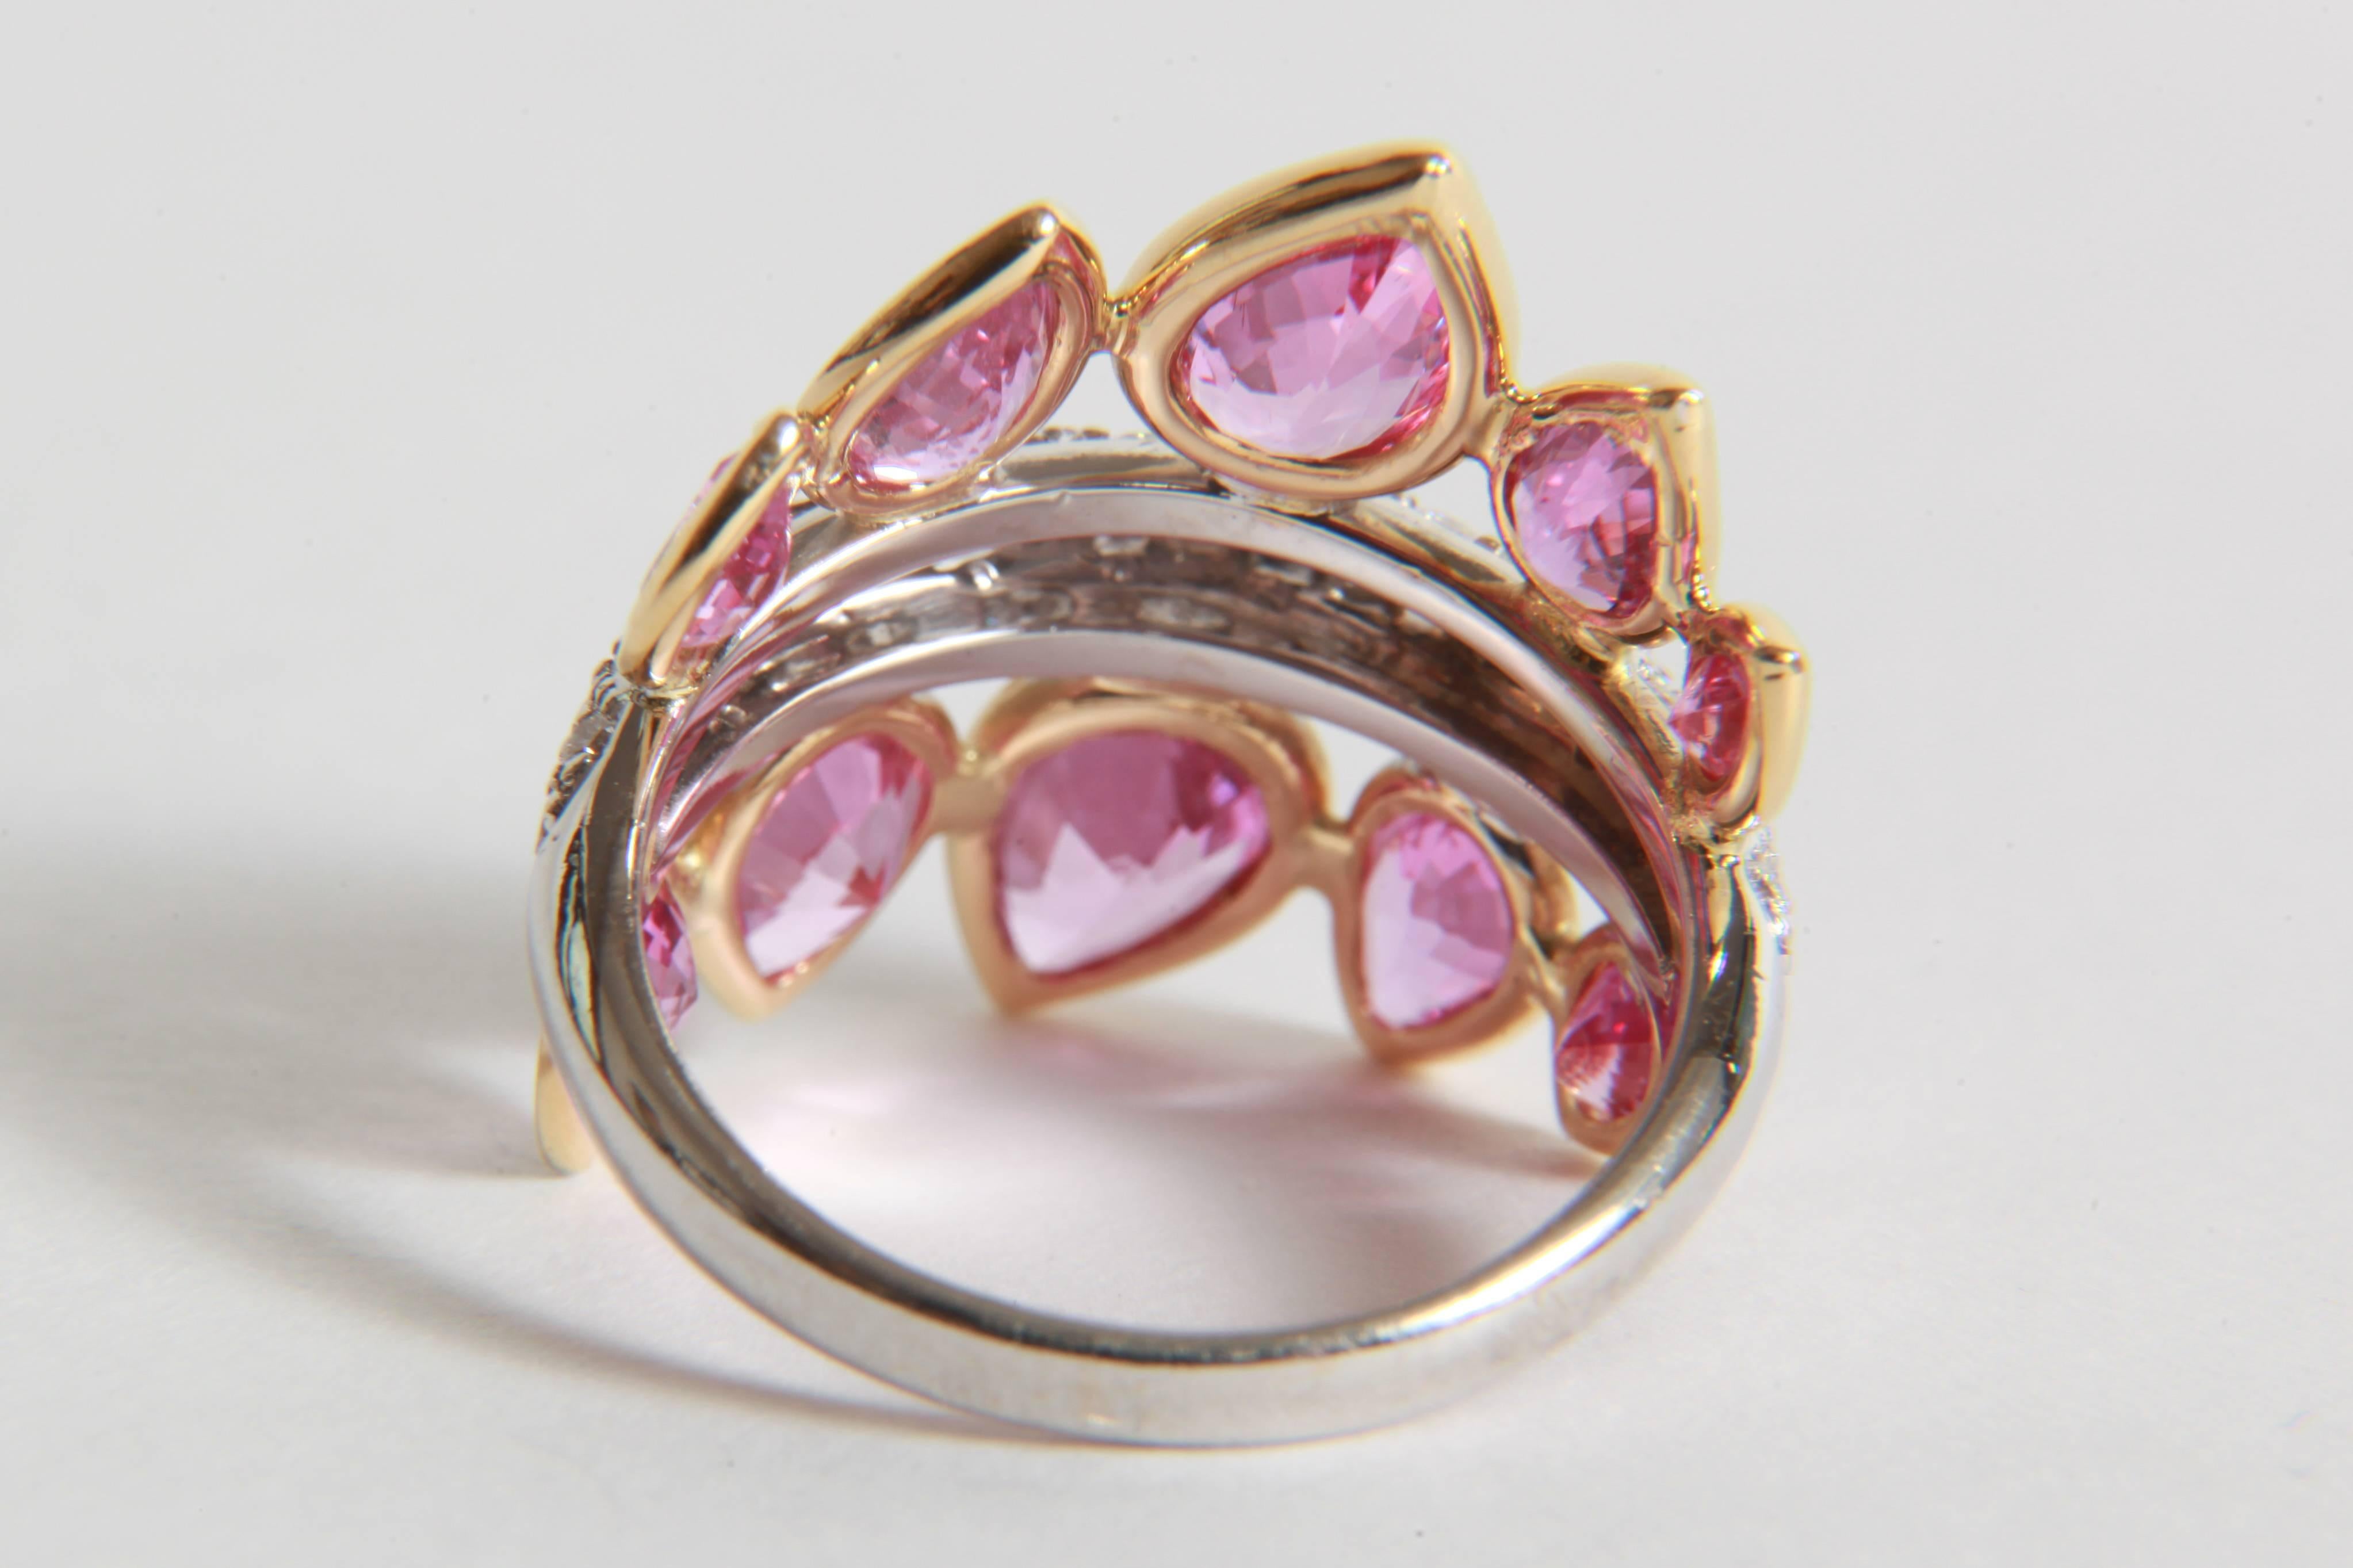 4, 74 Carats Pink Sapphires and 1 Carat White Diamonds Ring by Marion Jeantet 1